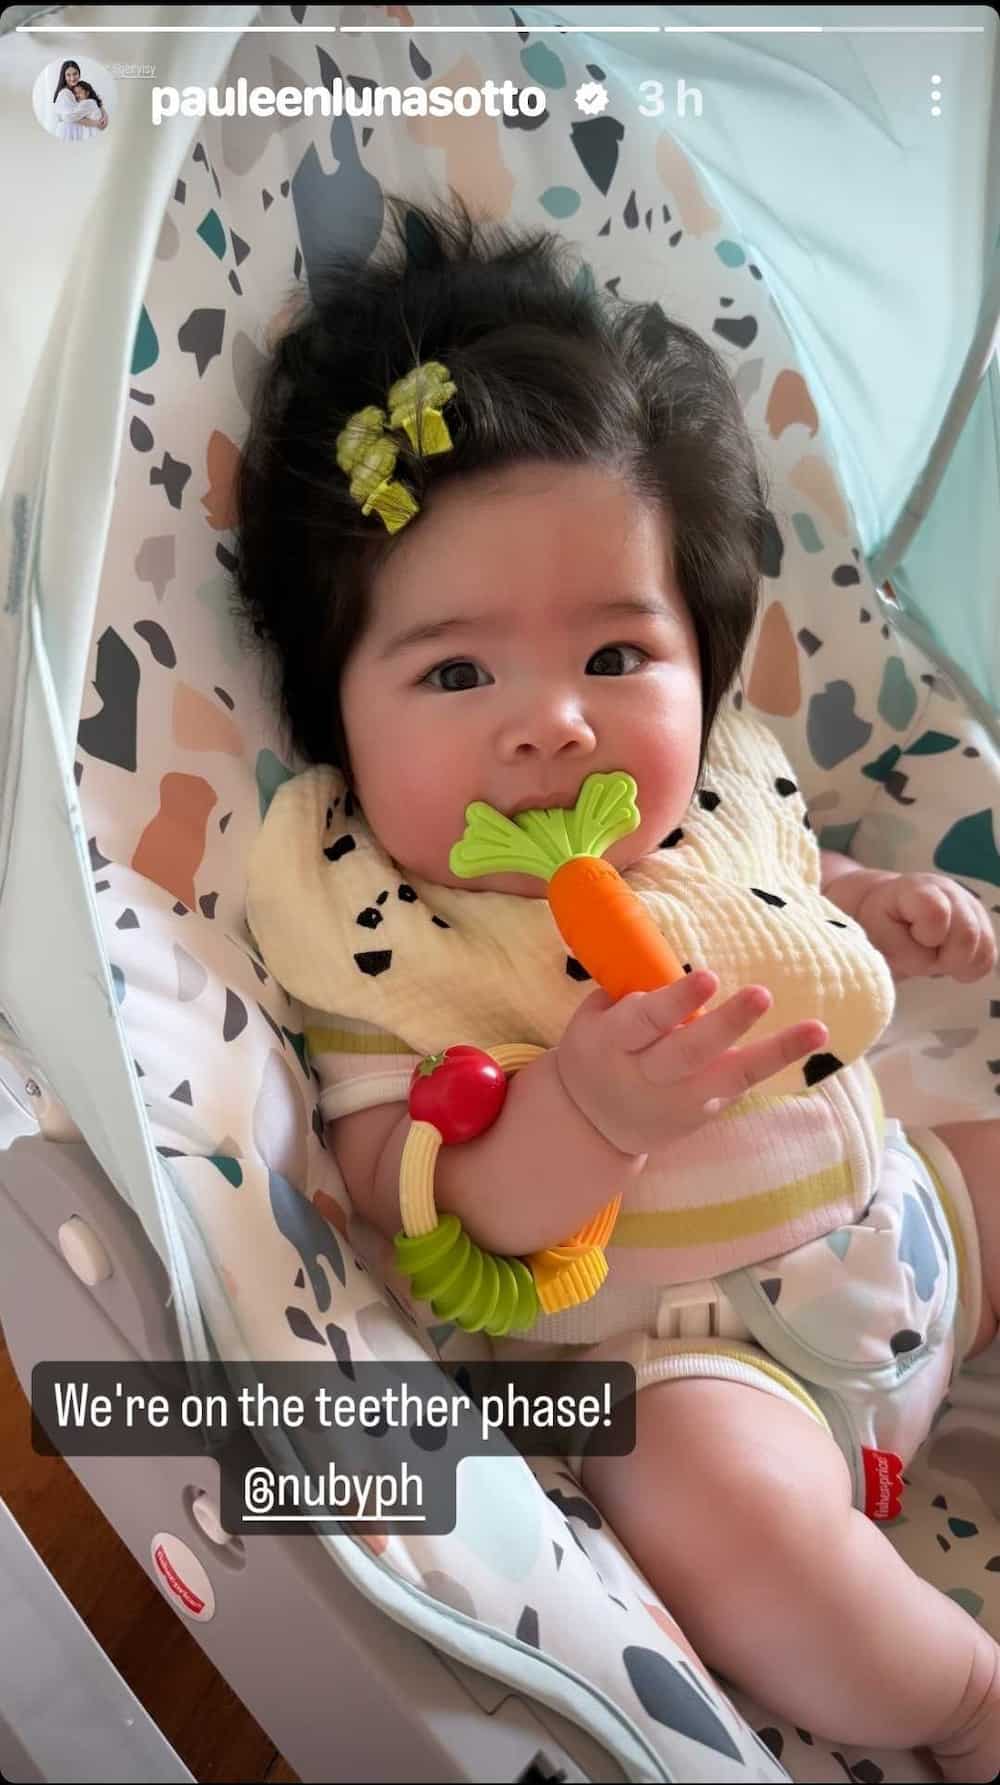 Pauleen Luna shares adorable photo of Baby Mochi using cute teether